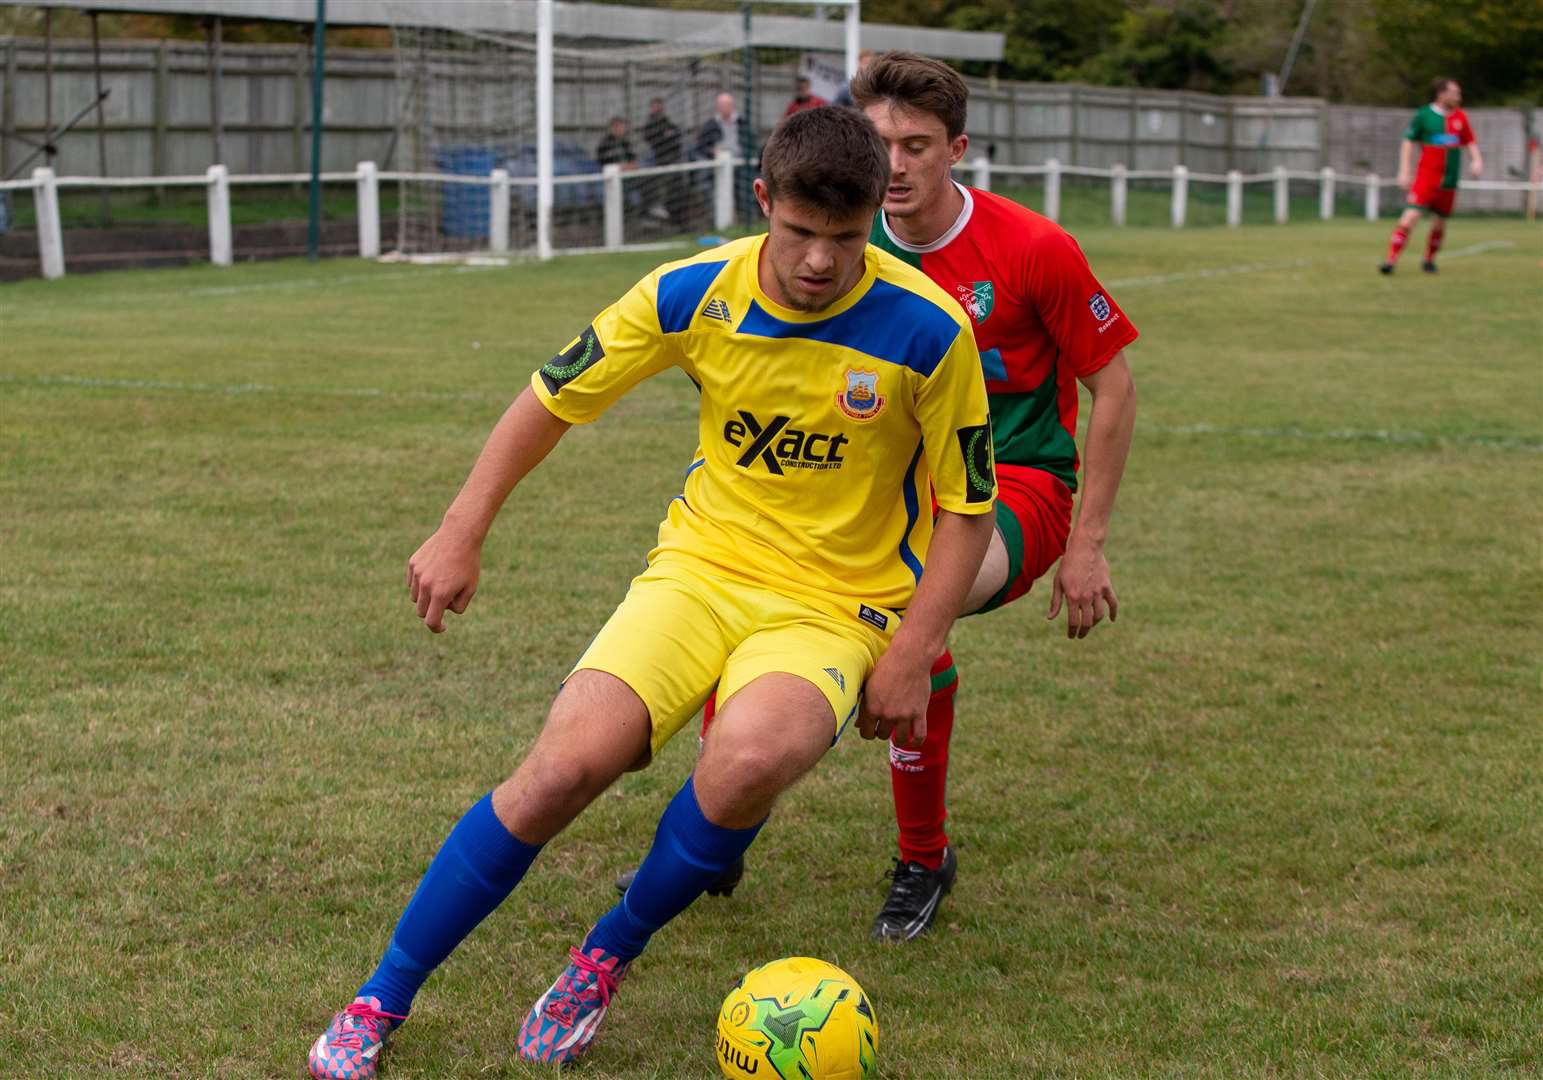 Whitstable's Marshall Wratten in action against Chalfont St Peter